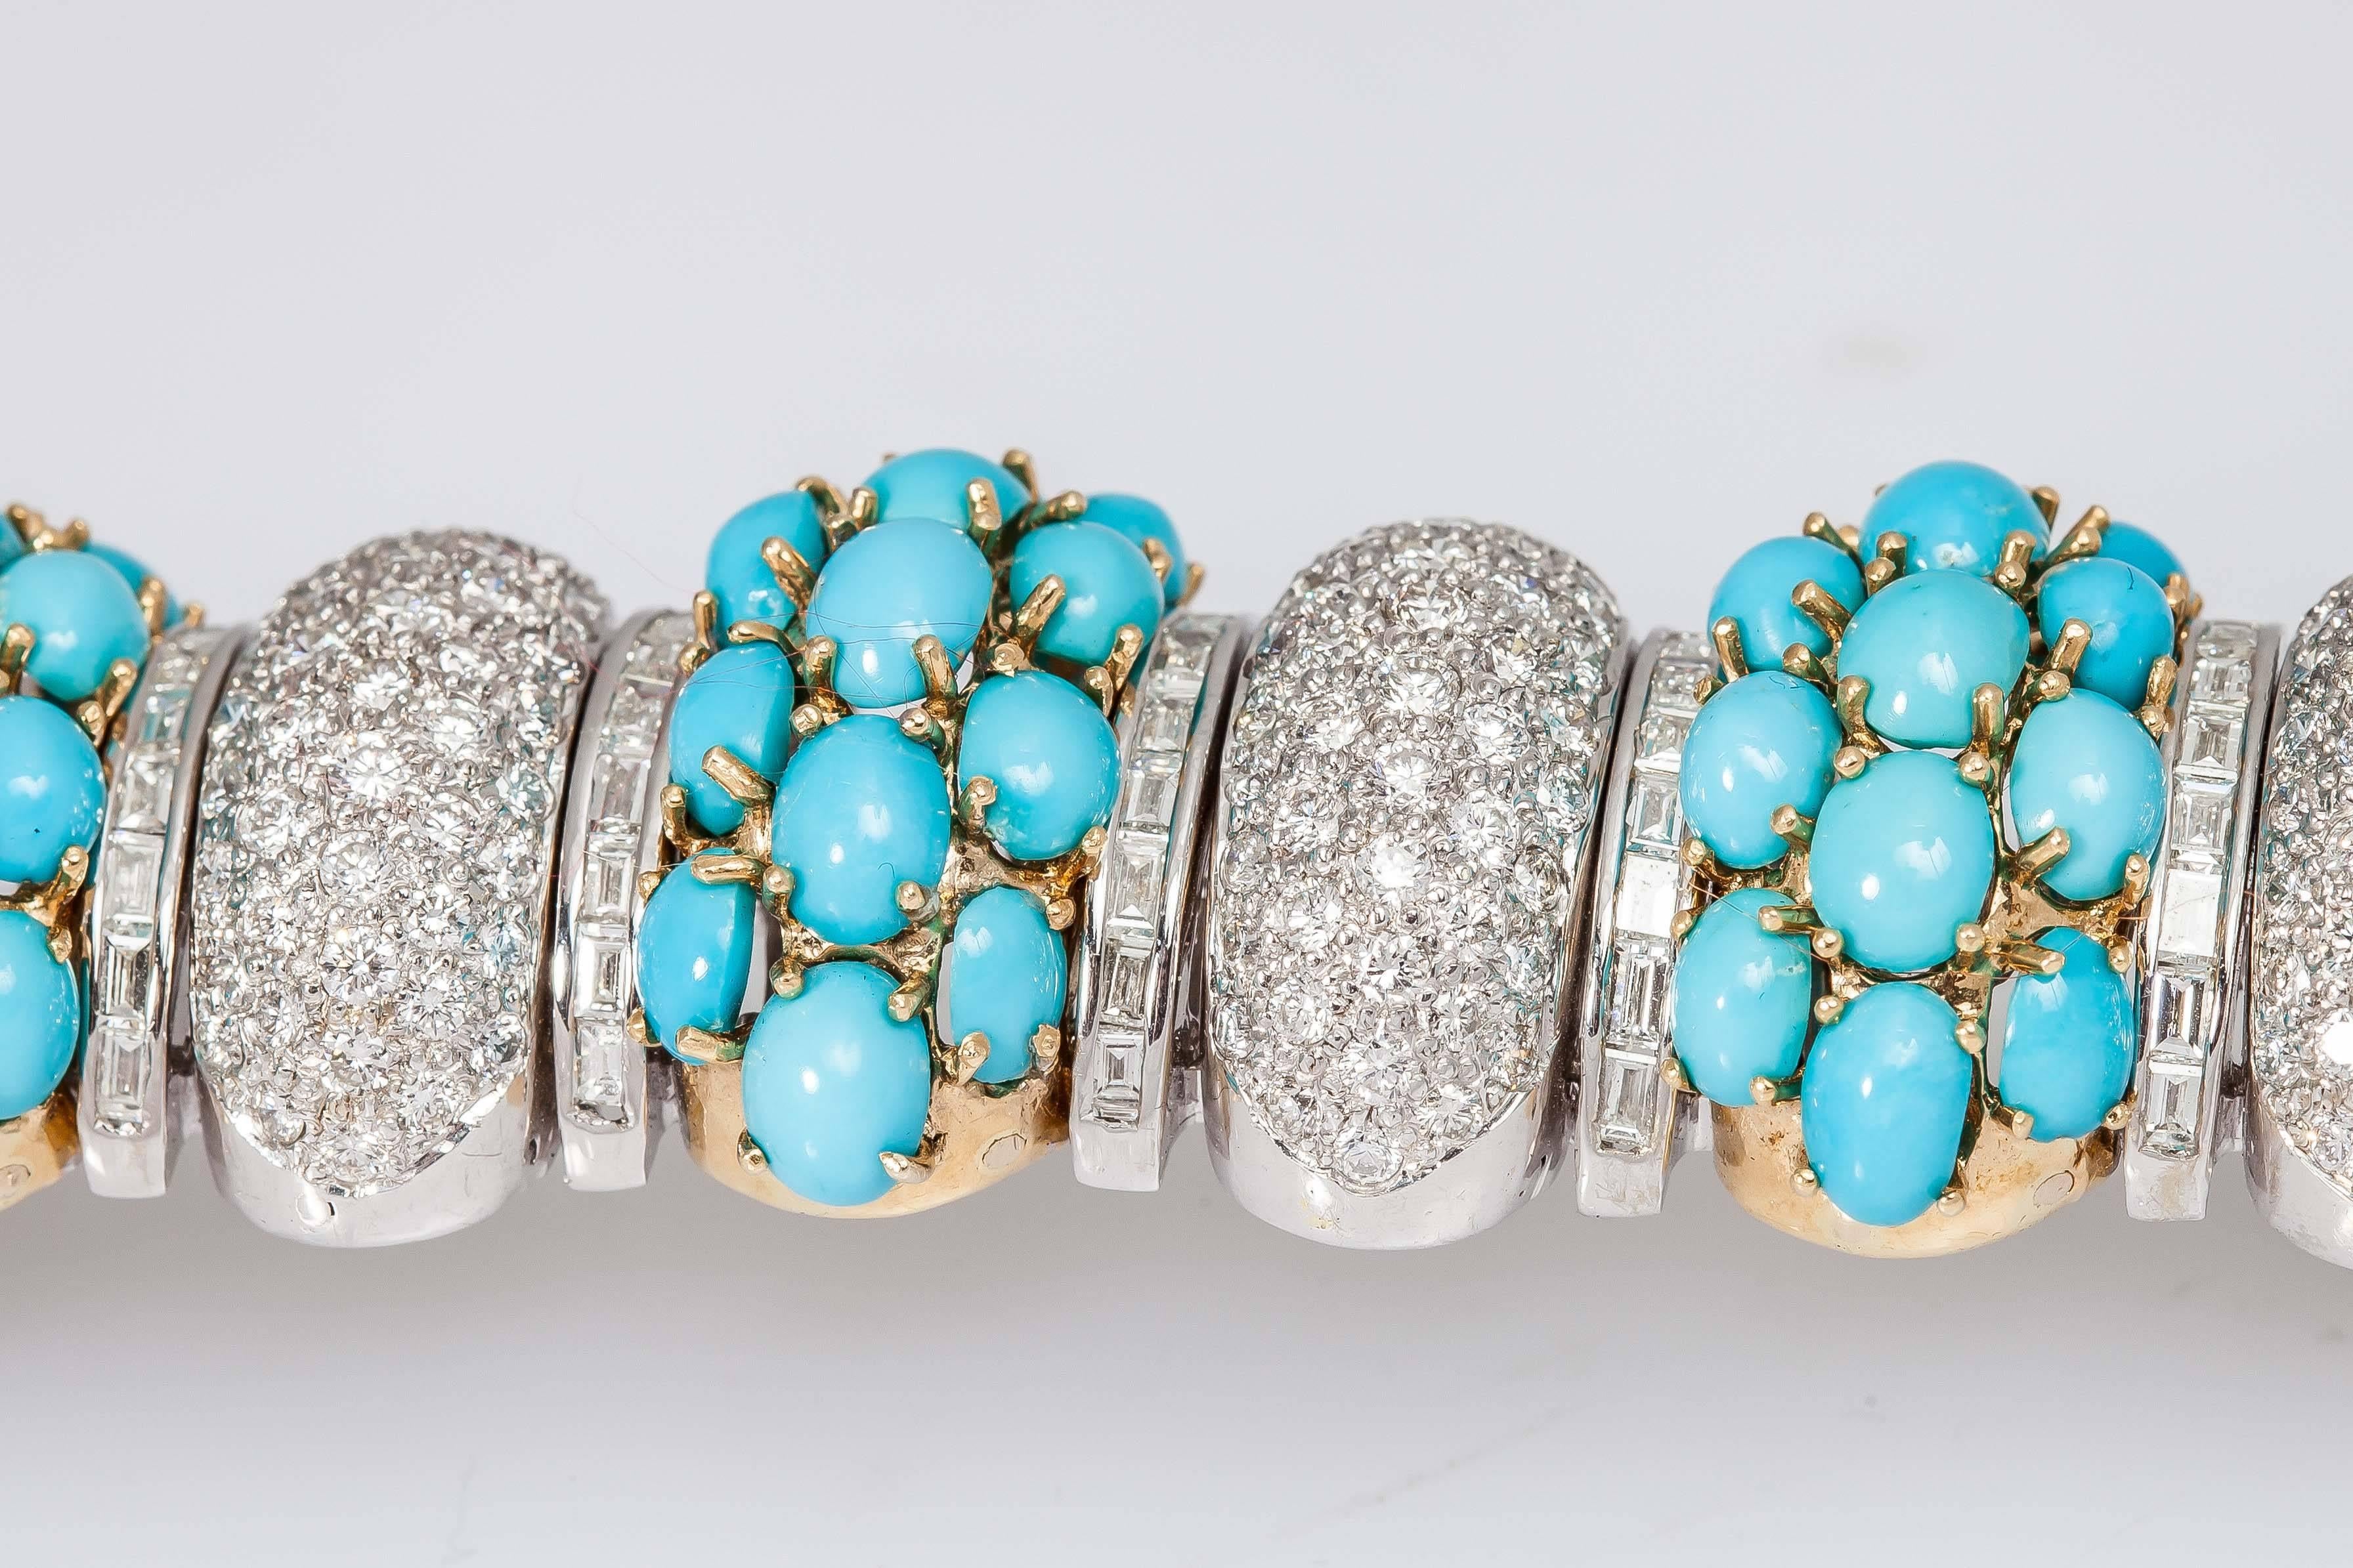 Beautiful turquoise and diamond bracelet finely crafted in 18k yellow and white gold. This bracelet has diamonds which weigh approx. 15.75 carats and turquoises which weigh approx. 41.75 carats.